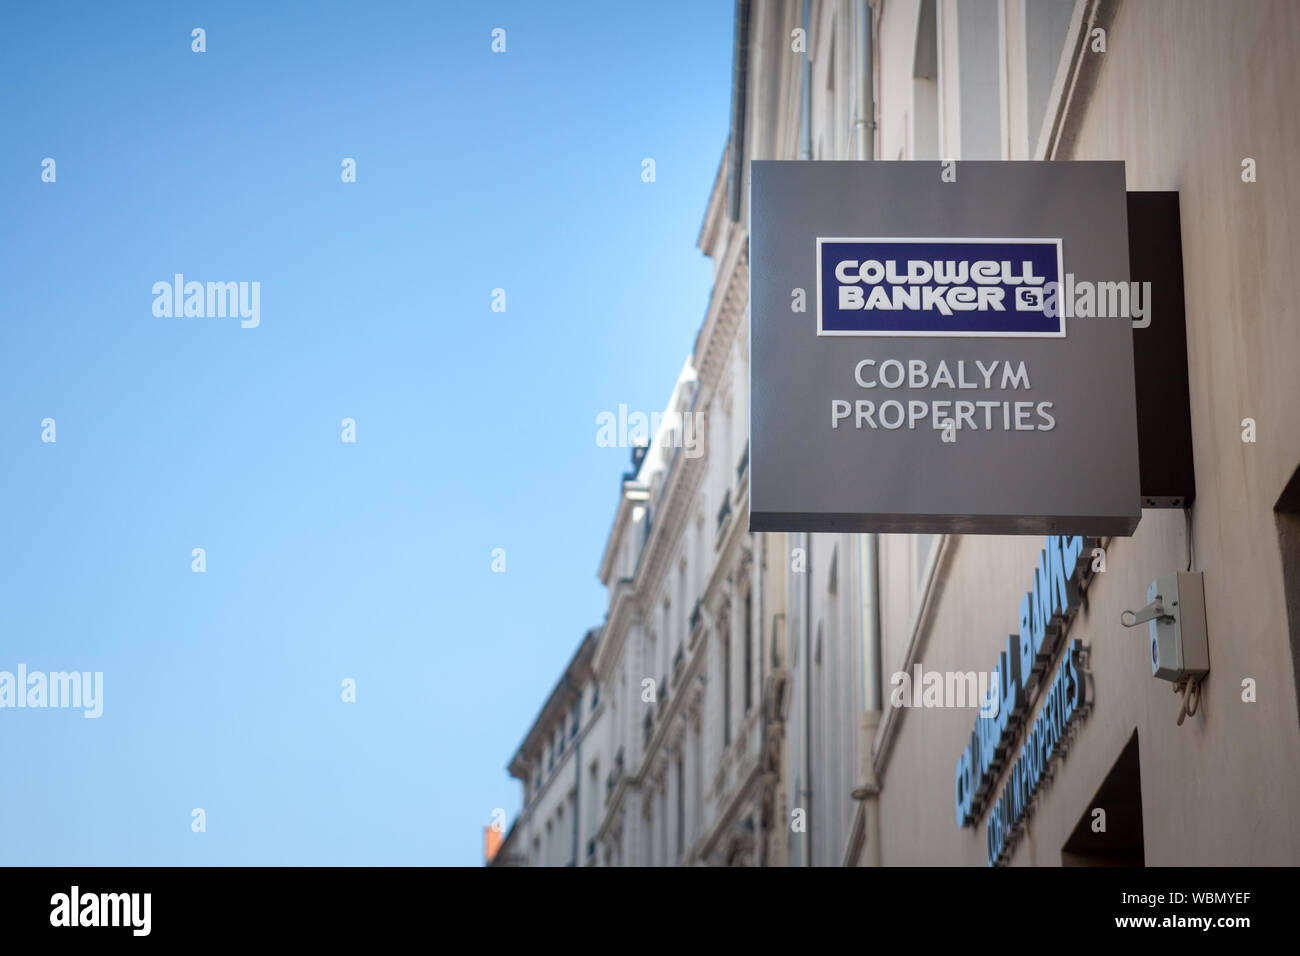 LYON, FRANCE - JULY 19, 2019: Coldwell Banker logo in front of their real estate agent for Lyon. Coldwell Banker is an American real estate franchise Stock Photo